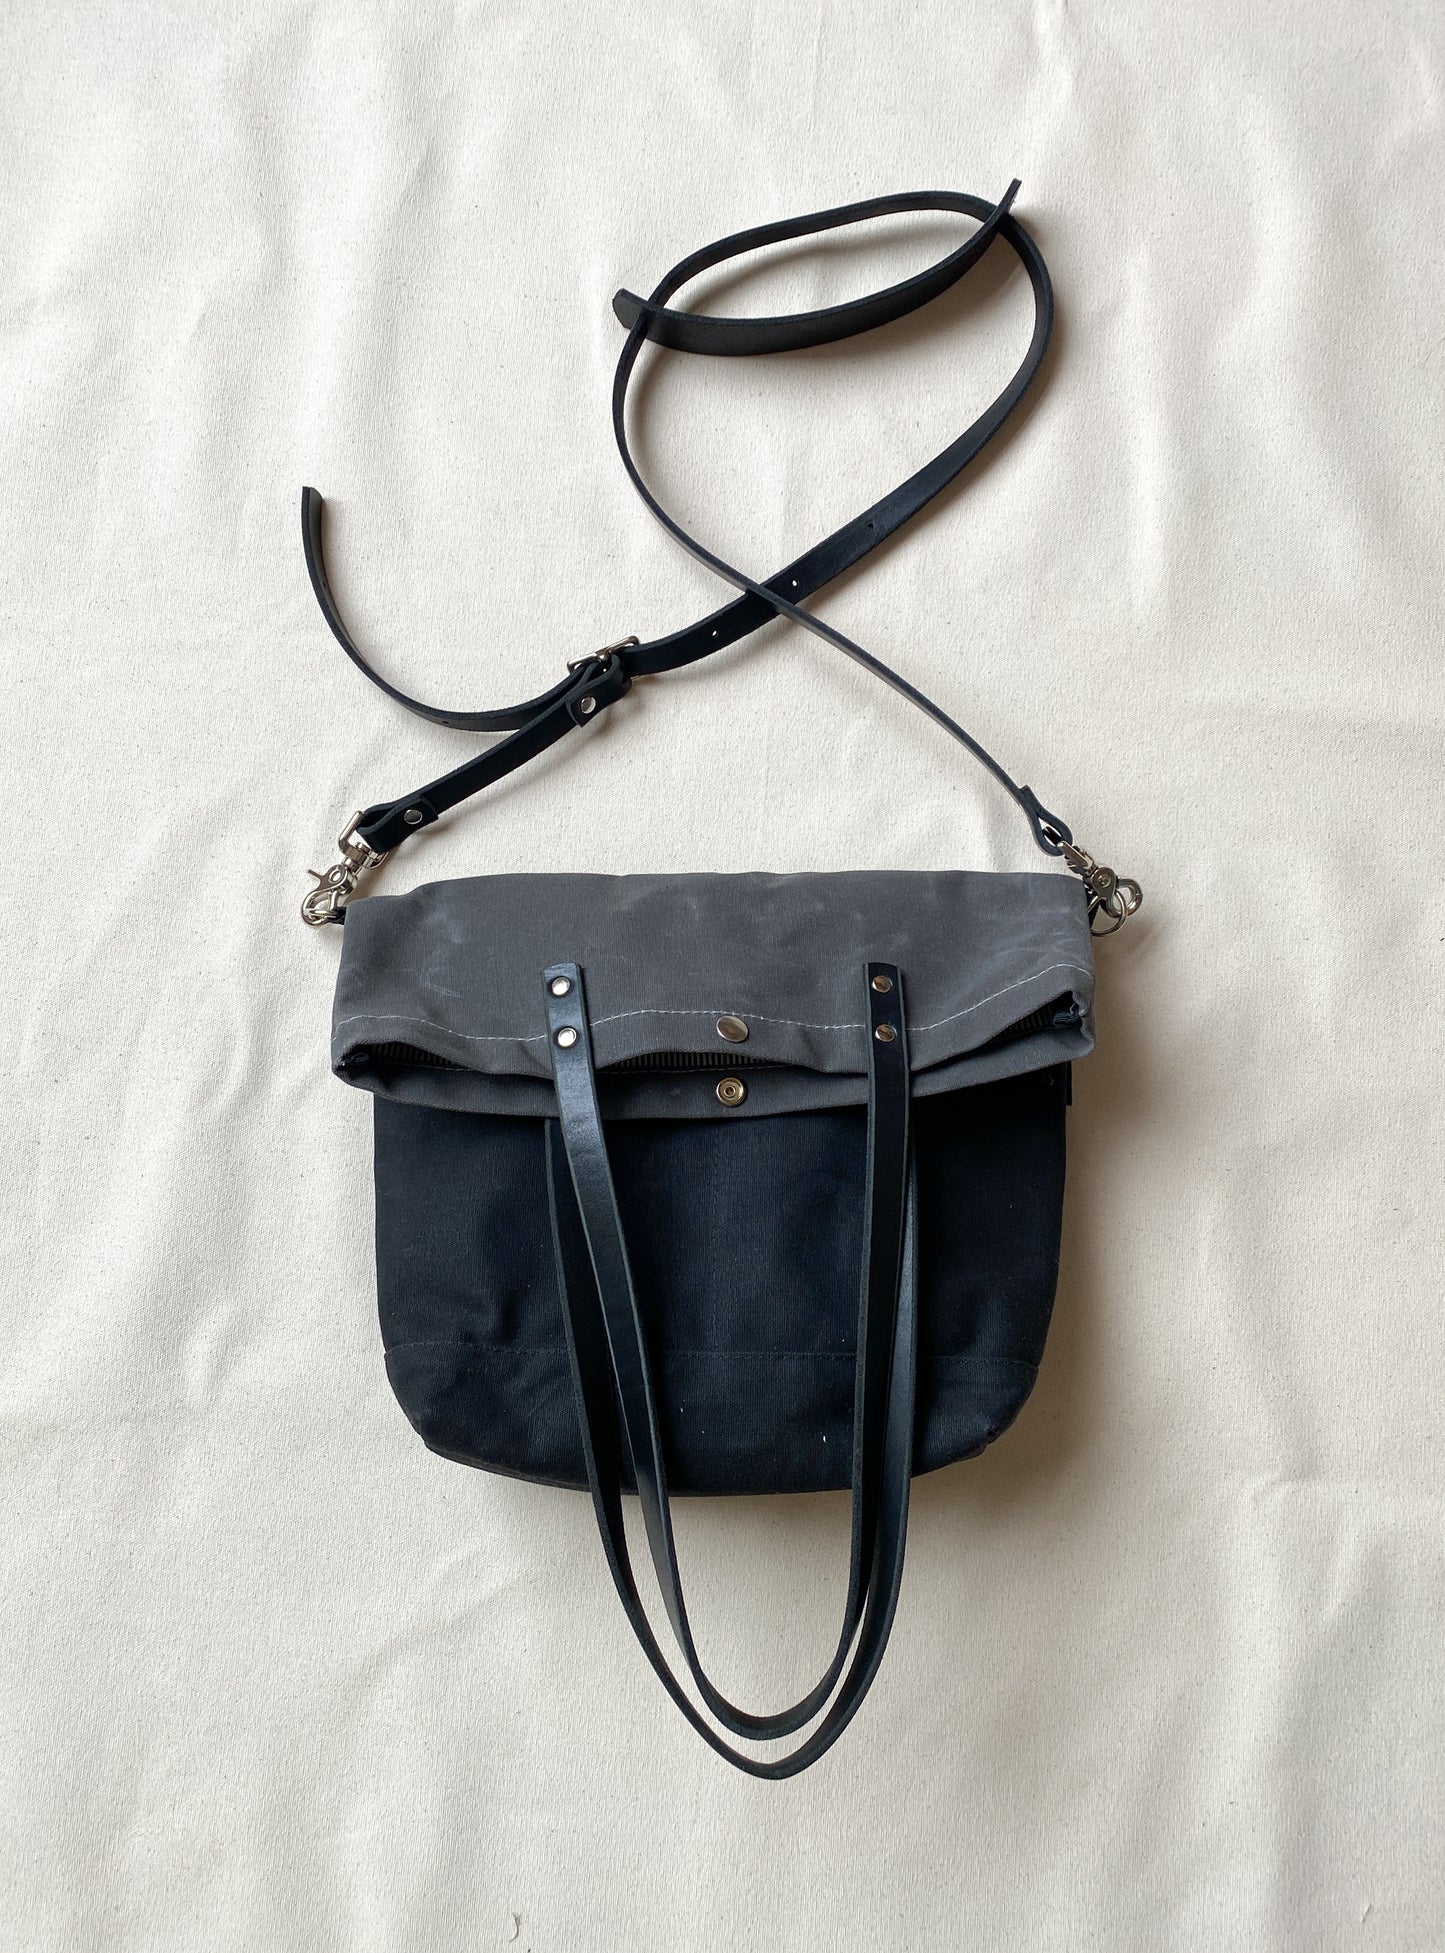 Convertible tote in slate and charcoal folded. 